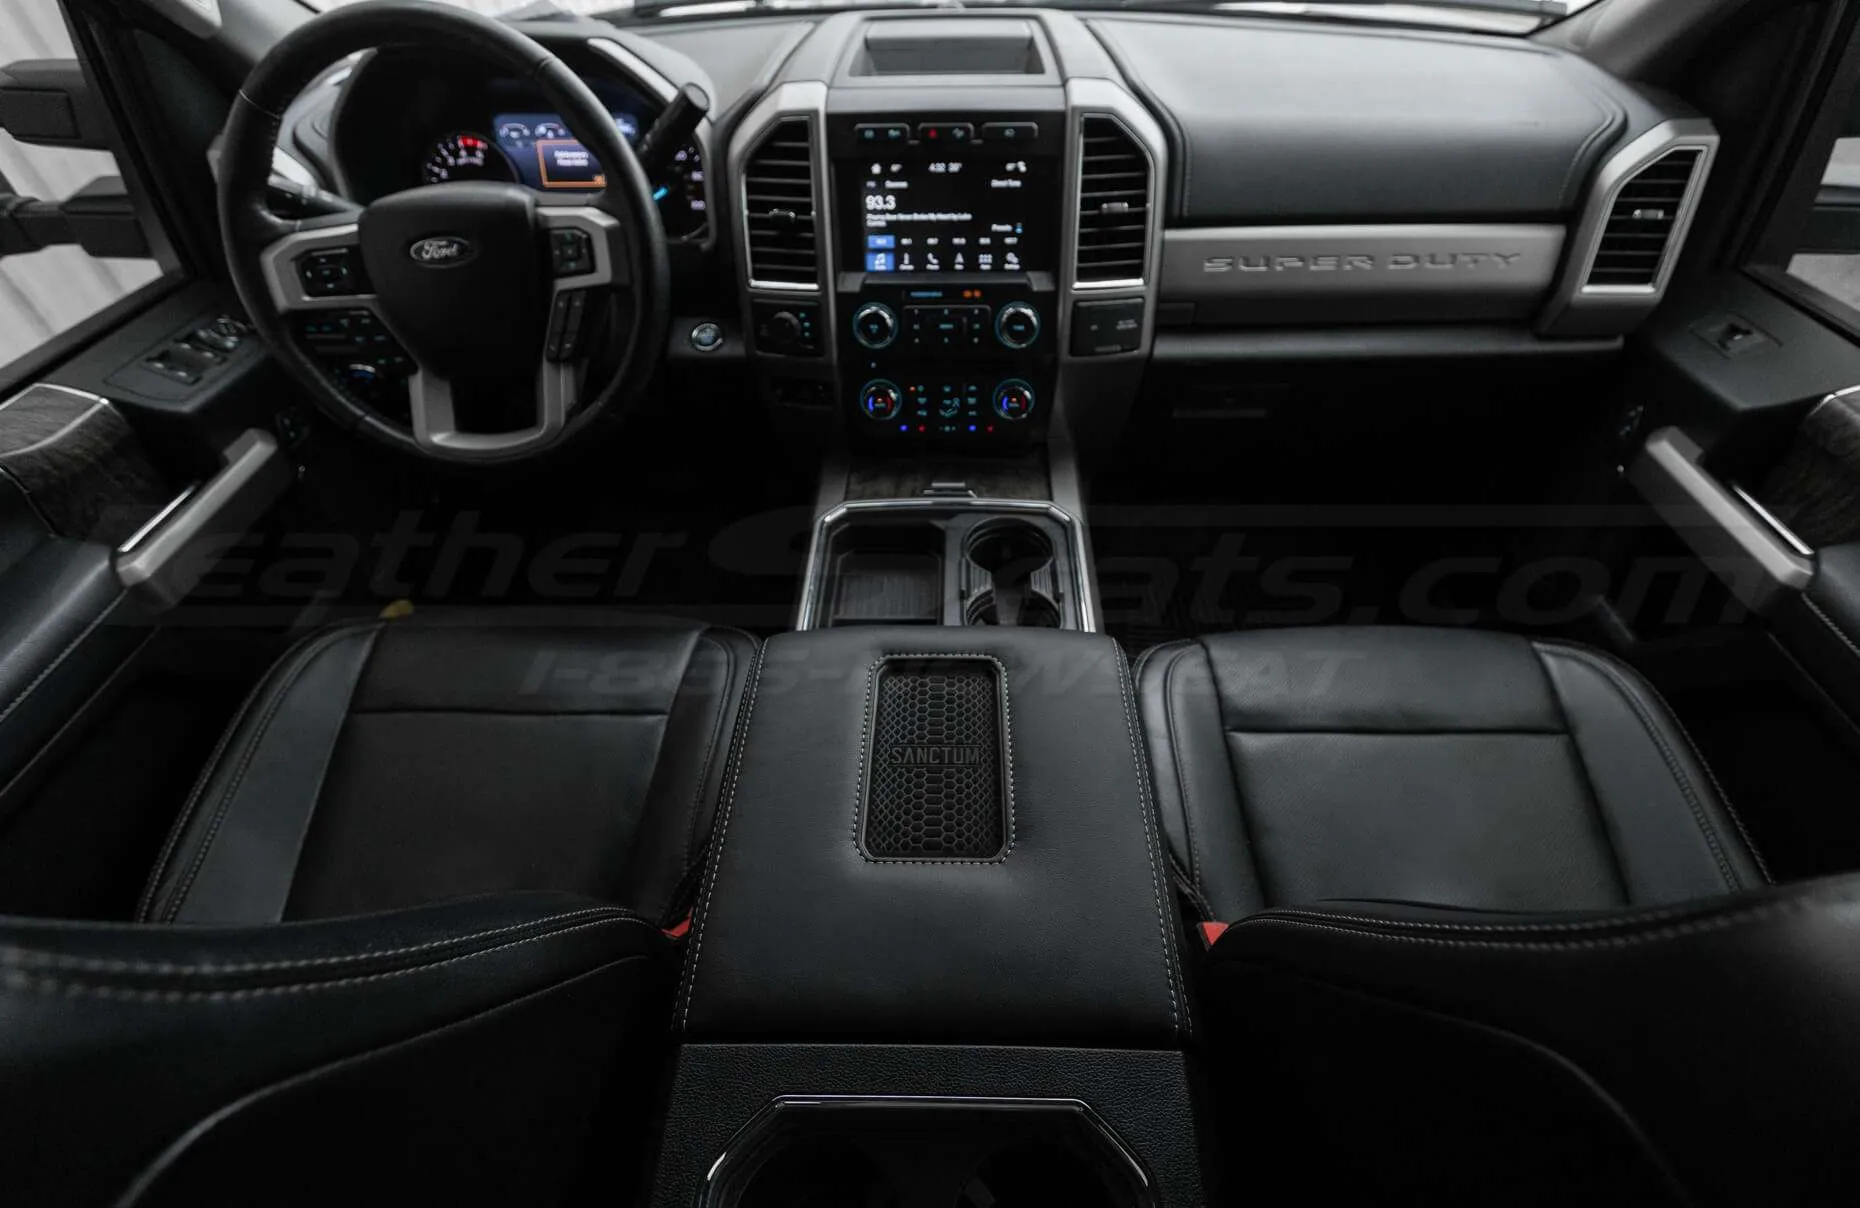 Custom Ford interior with wireless phone charging console